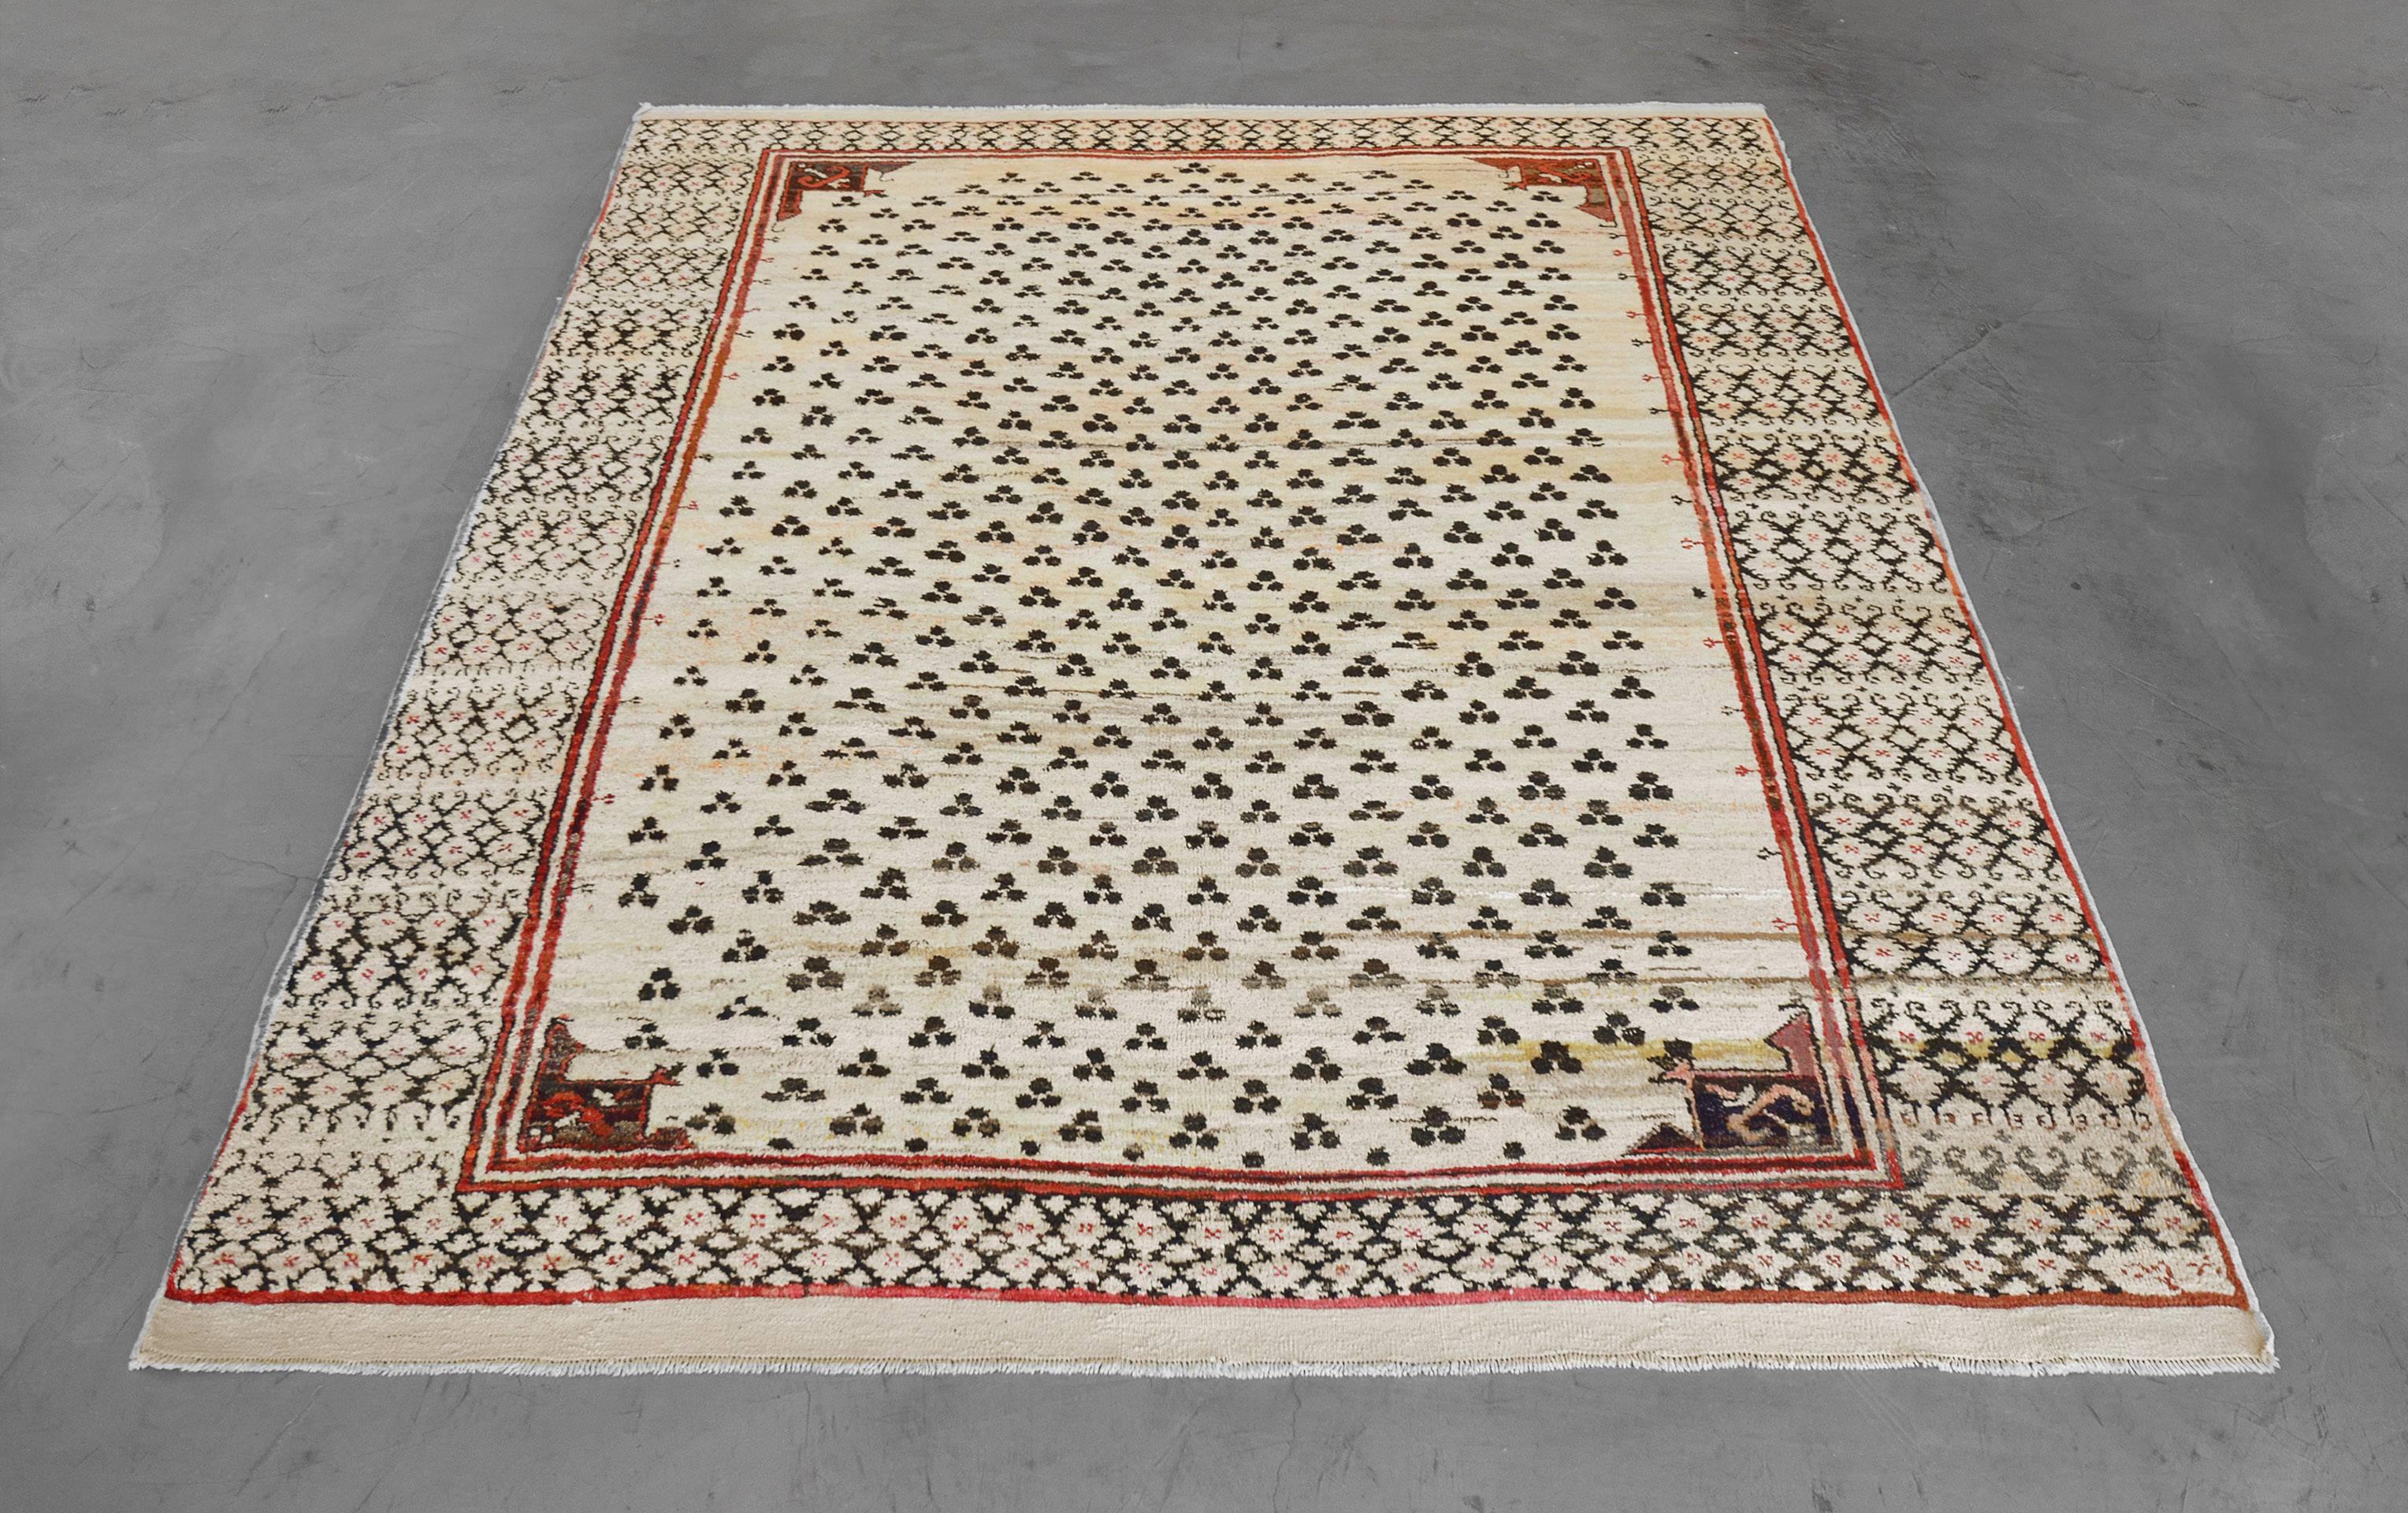 This dynamic vintage rug from the late 20th century is hand-knotted in Turkey from the finest wool. Sized at 7’3” x 8’7” this rug has a distinct tiger eye design on a muted beige field surrounded by a diamond pattern motif. The geometric pattern and